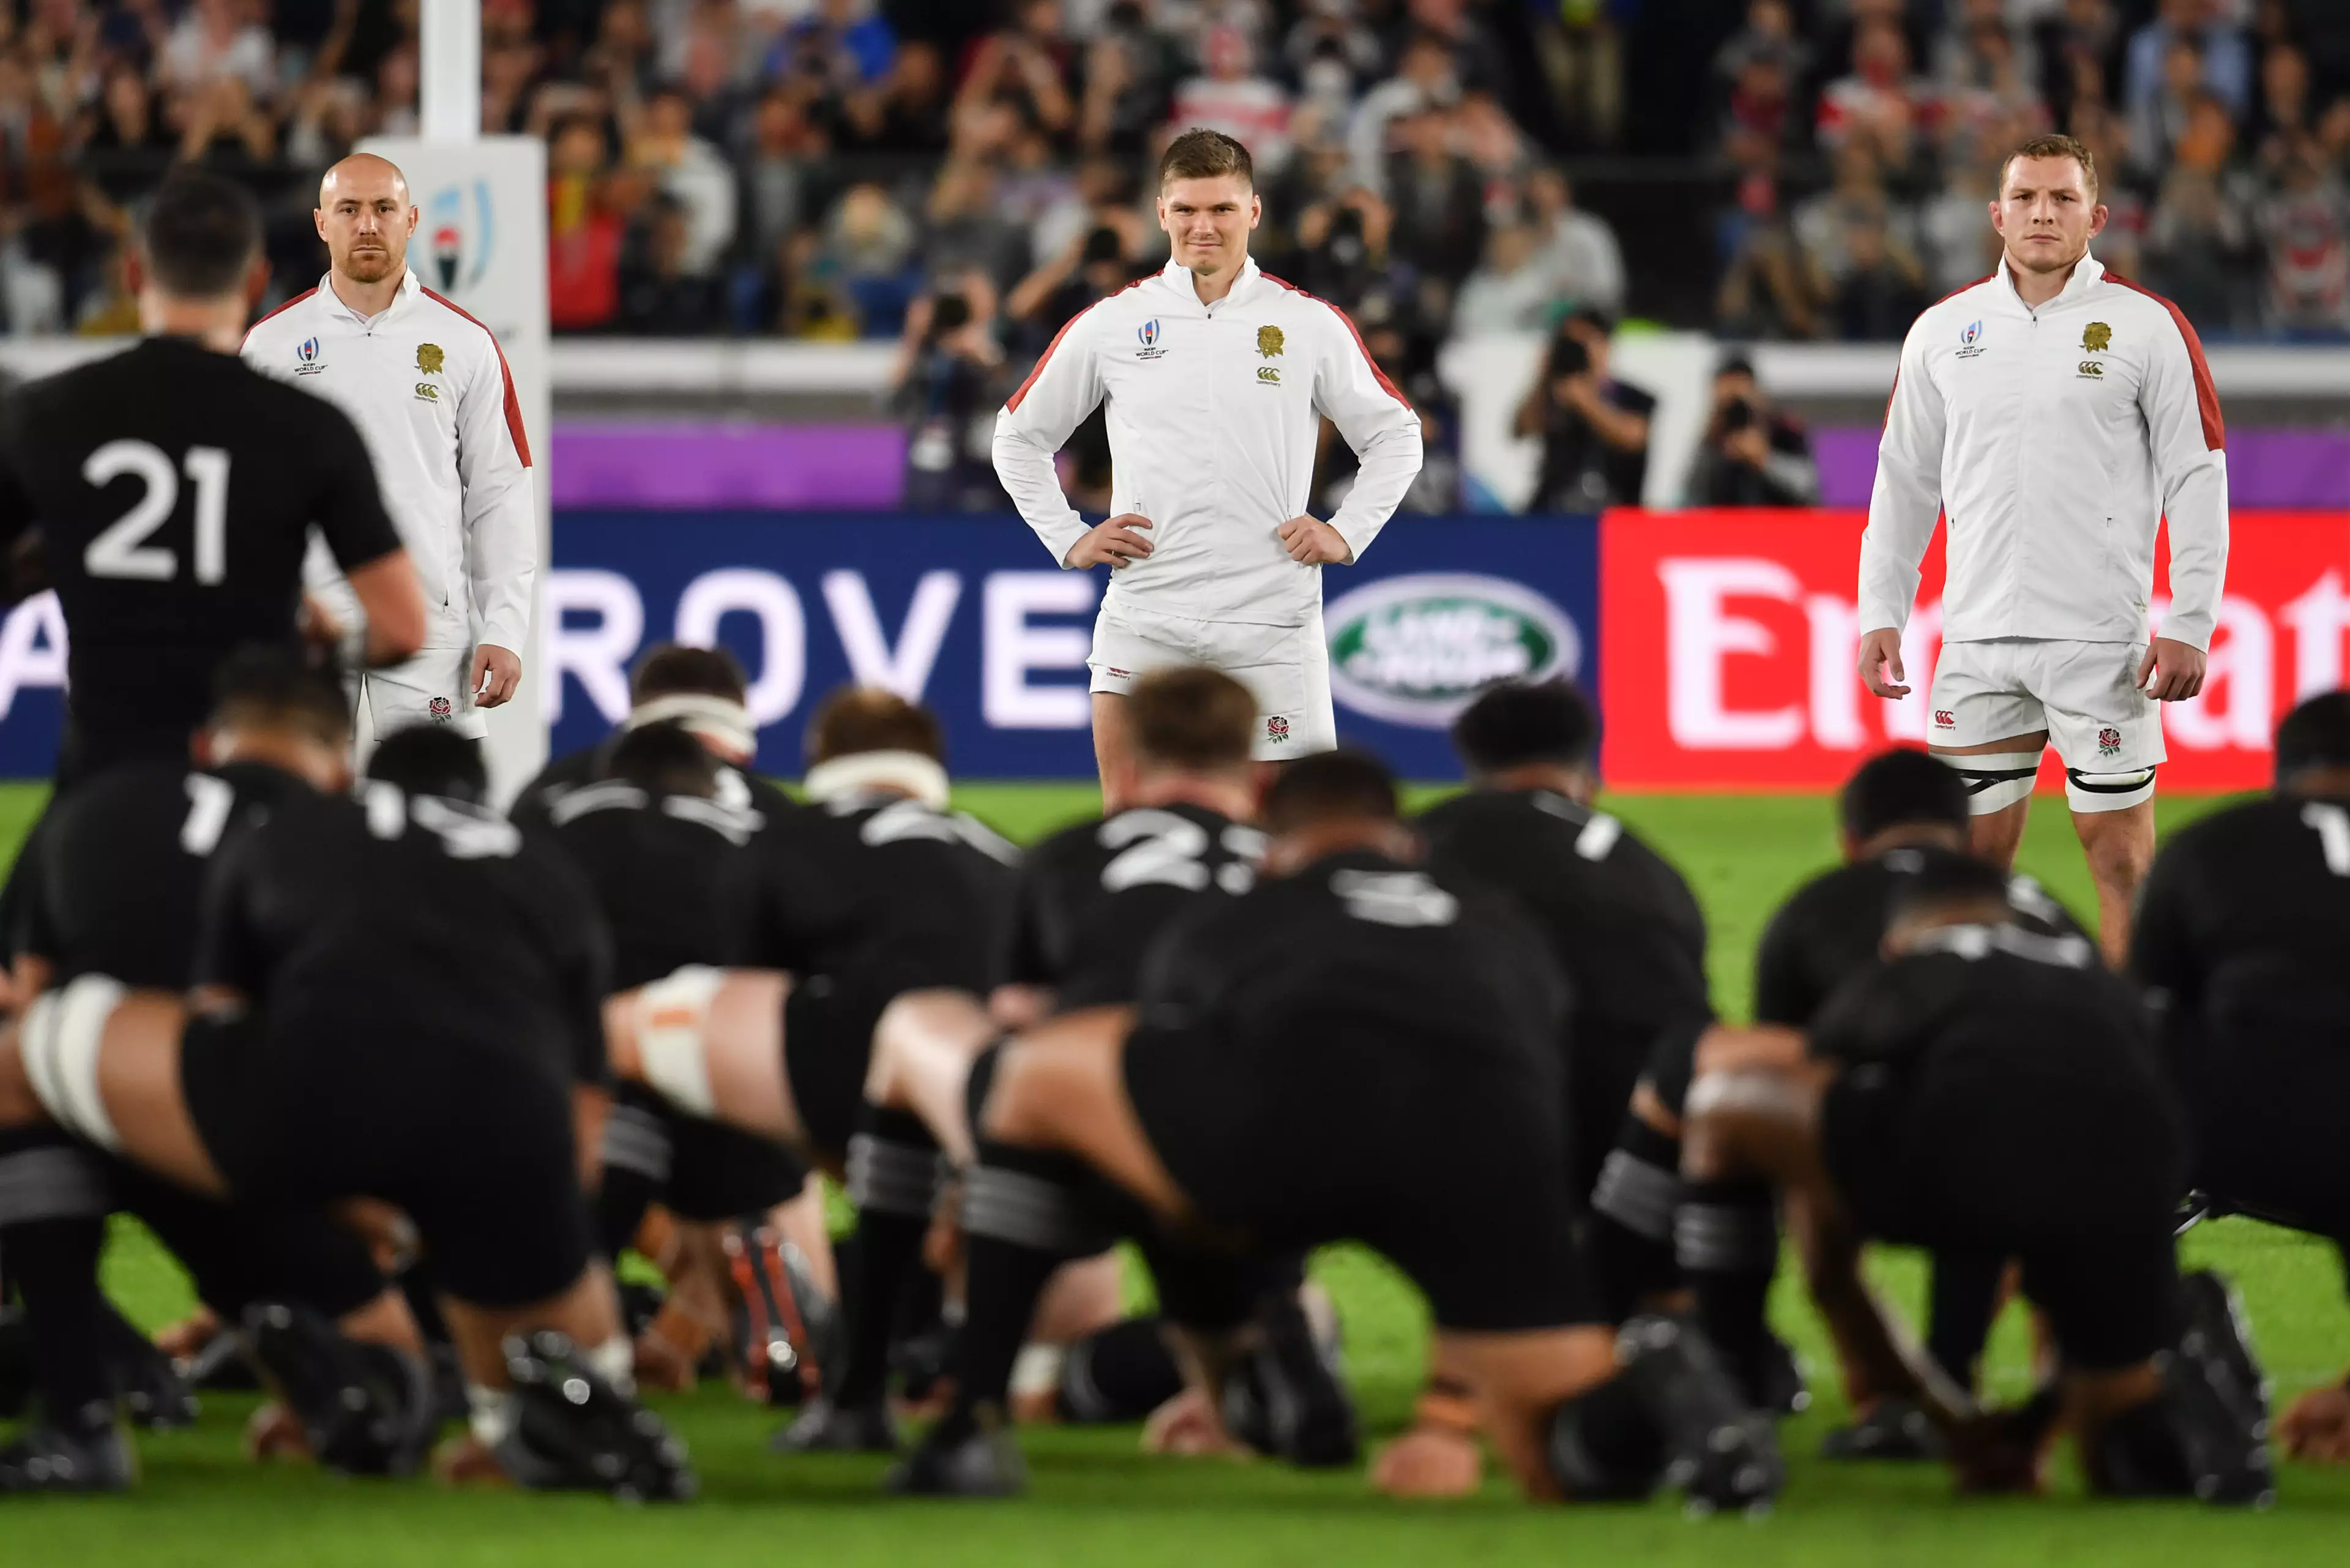 England have been fined for crossing the halfway line during New Zealand's performance of the haka.